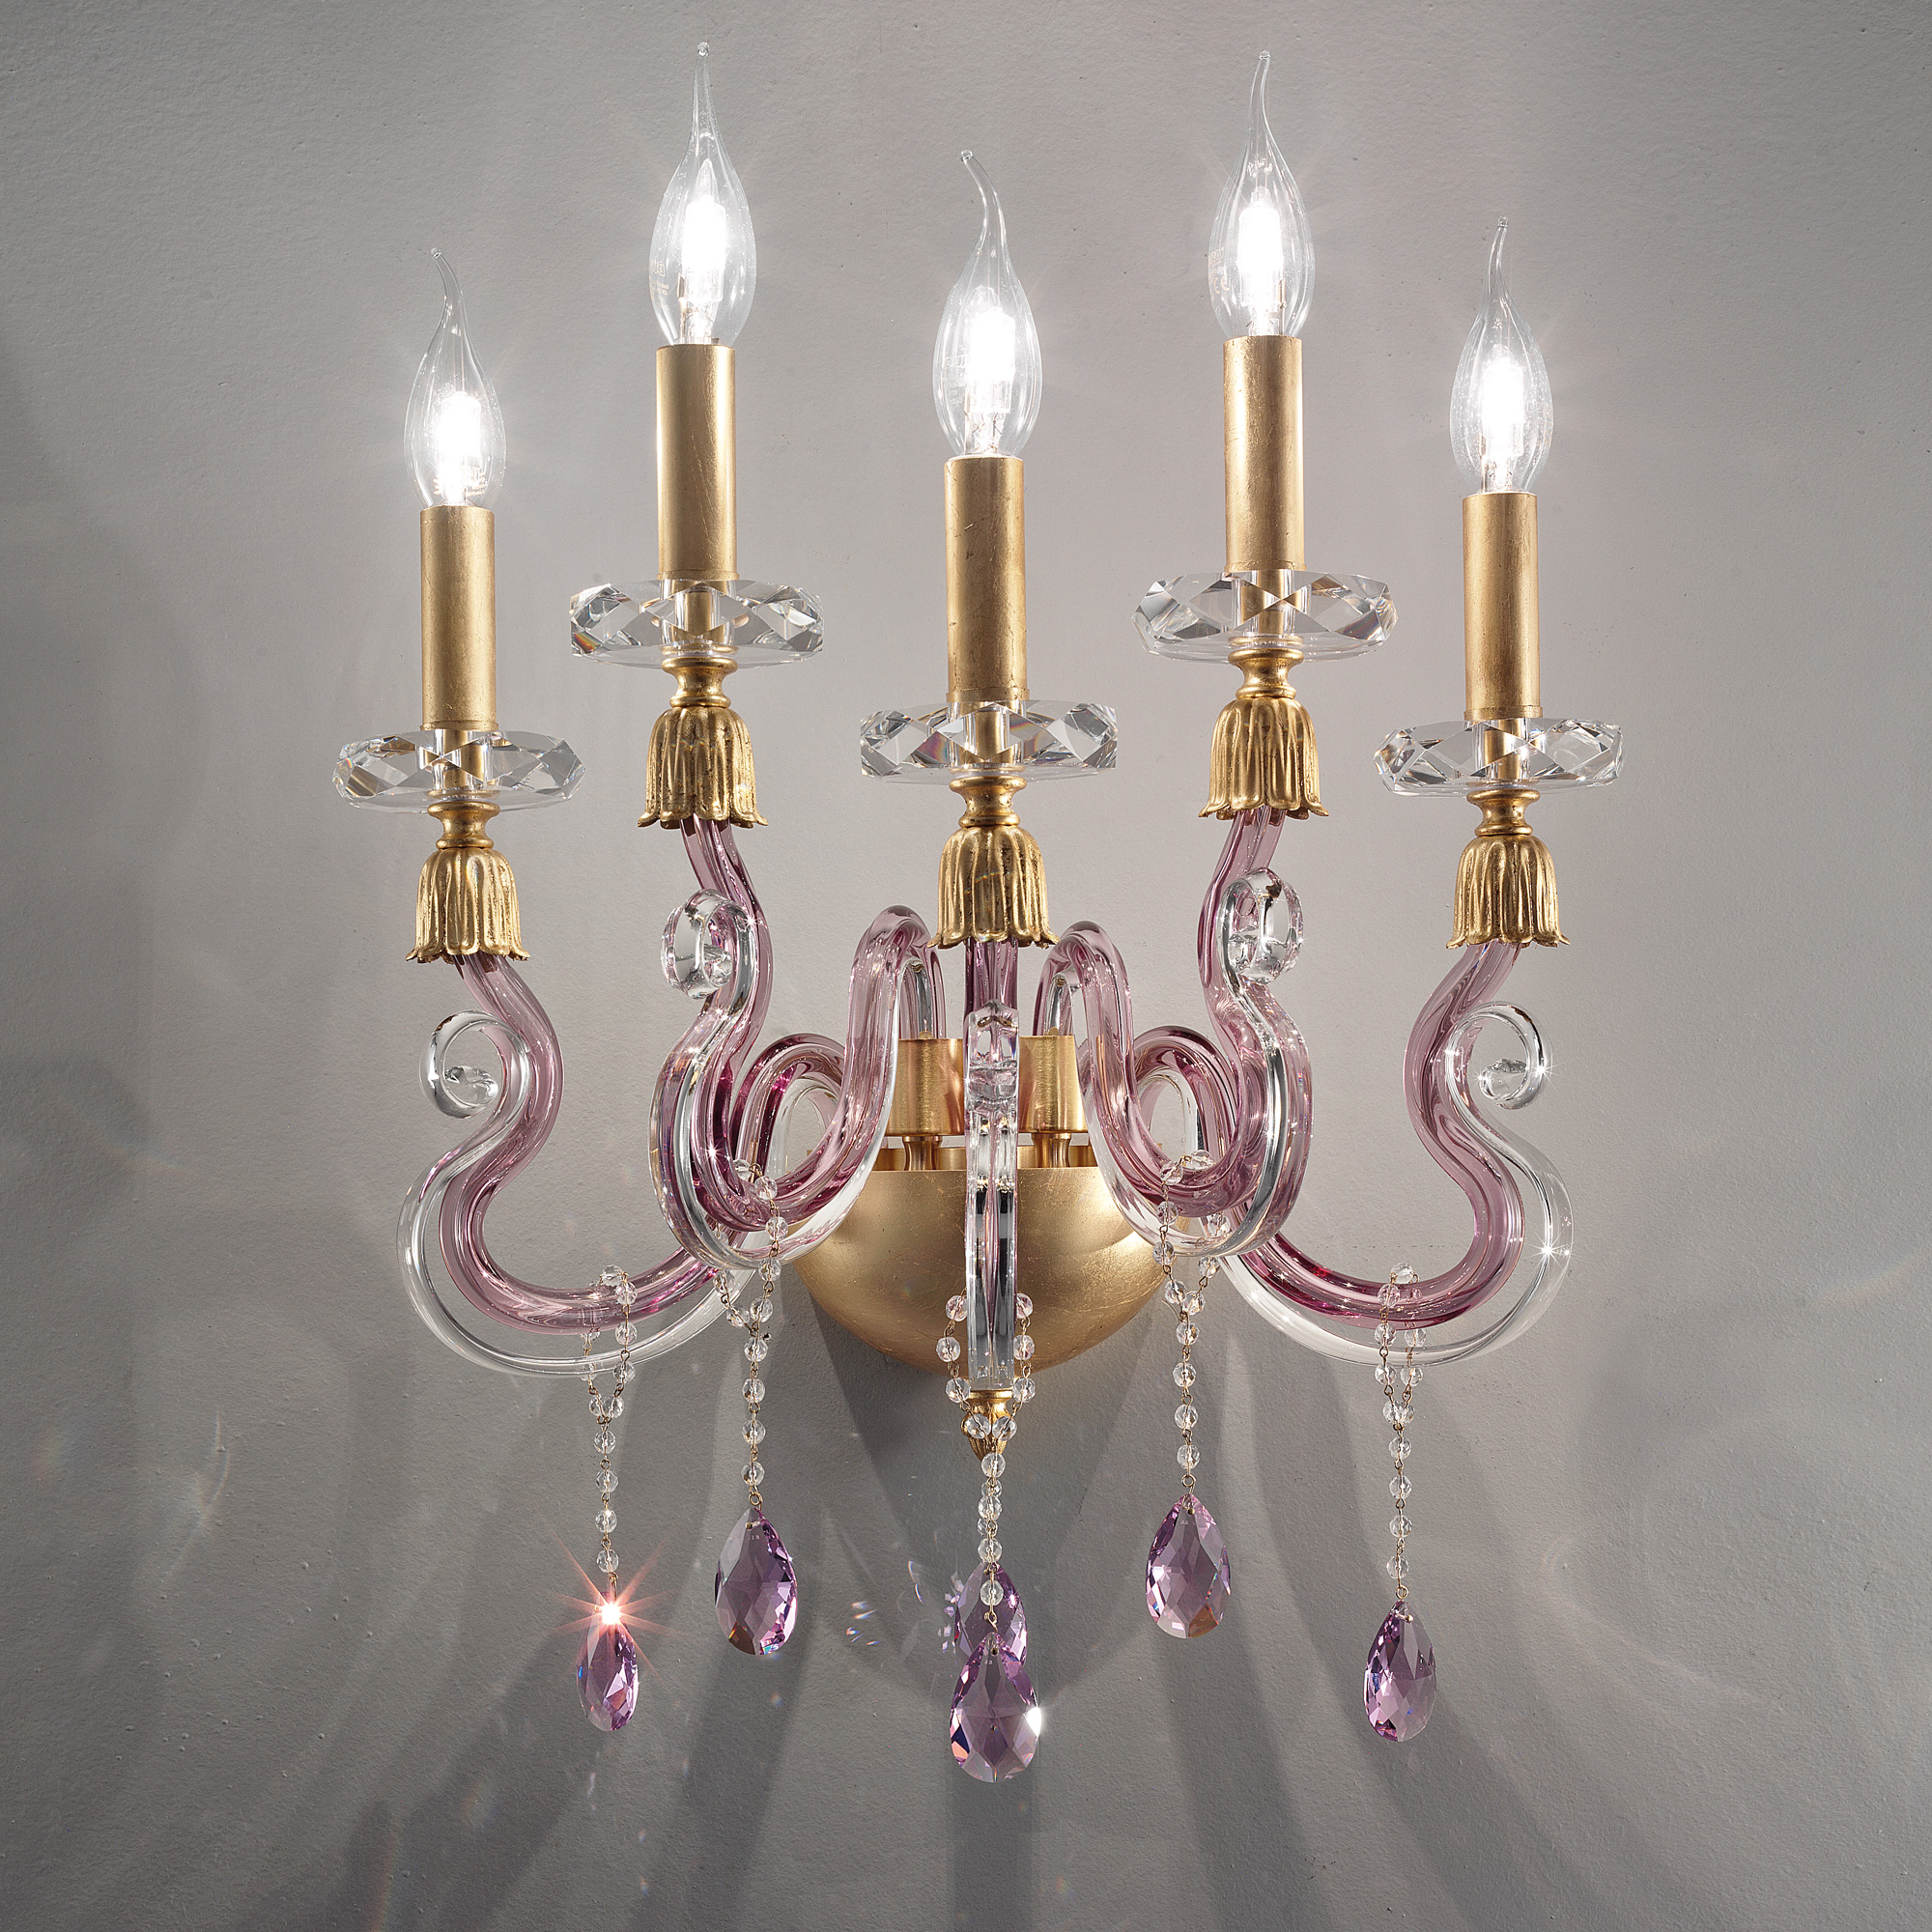 Contemporary 5 Arm Candle Style Glass Wall Light